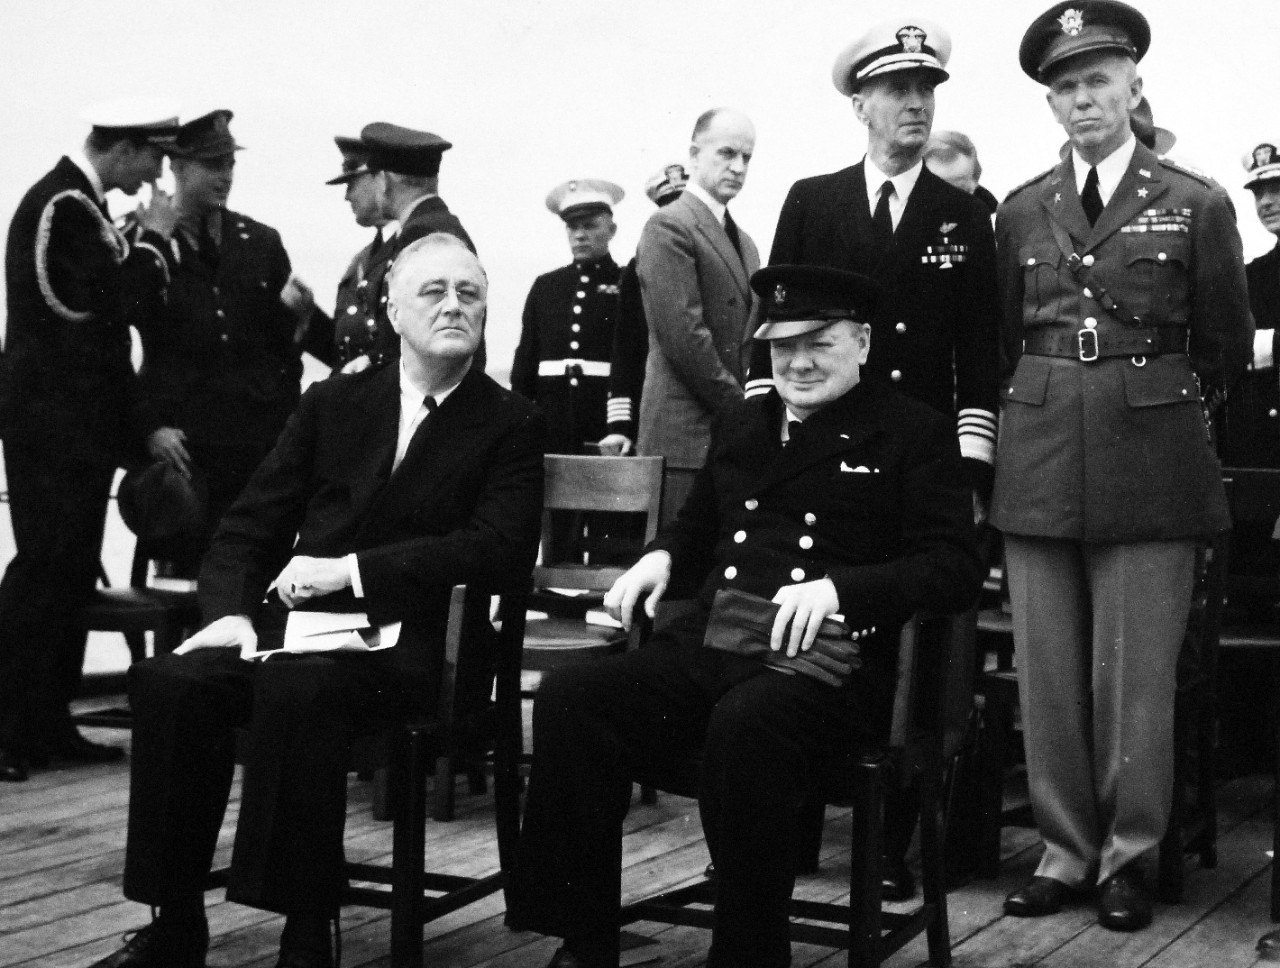 80-G-26870: Atlantic Charter, August 1941.  Informal group photograph including President Franklin D. Roosevelt and Prime Minister Winston S. Churchill on deck of HMS Prince of Wales following church services during the Atlantic Charter.  Shown behind Roosevelt and Churchill are Admiral Ernest J. King and General George C. Marshall.   Photograph released August 1941.   Official U.S. Navy Photograph, now in the collections of the National Archives.  (2016/03/22).